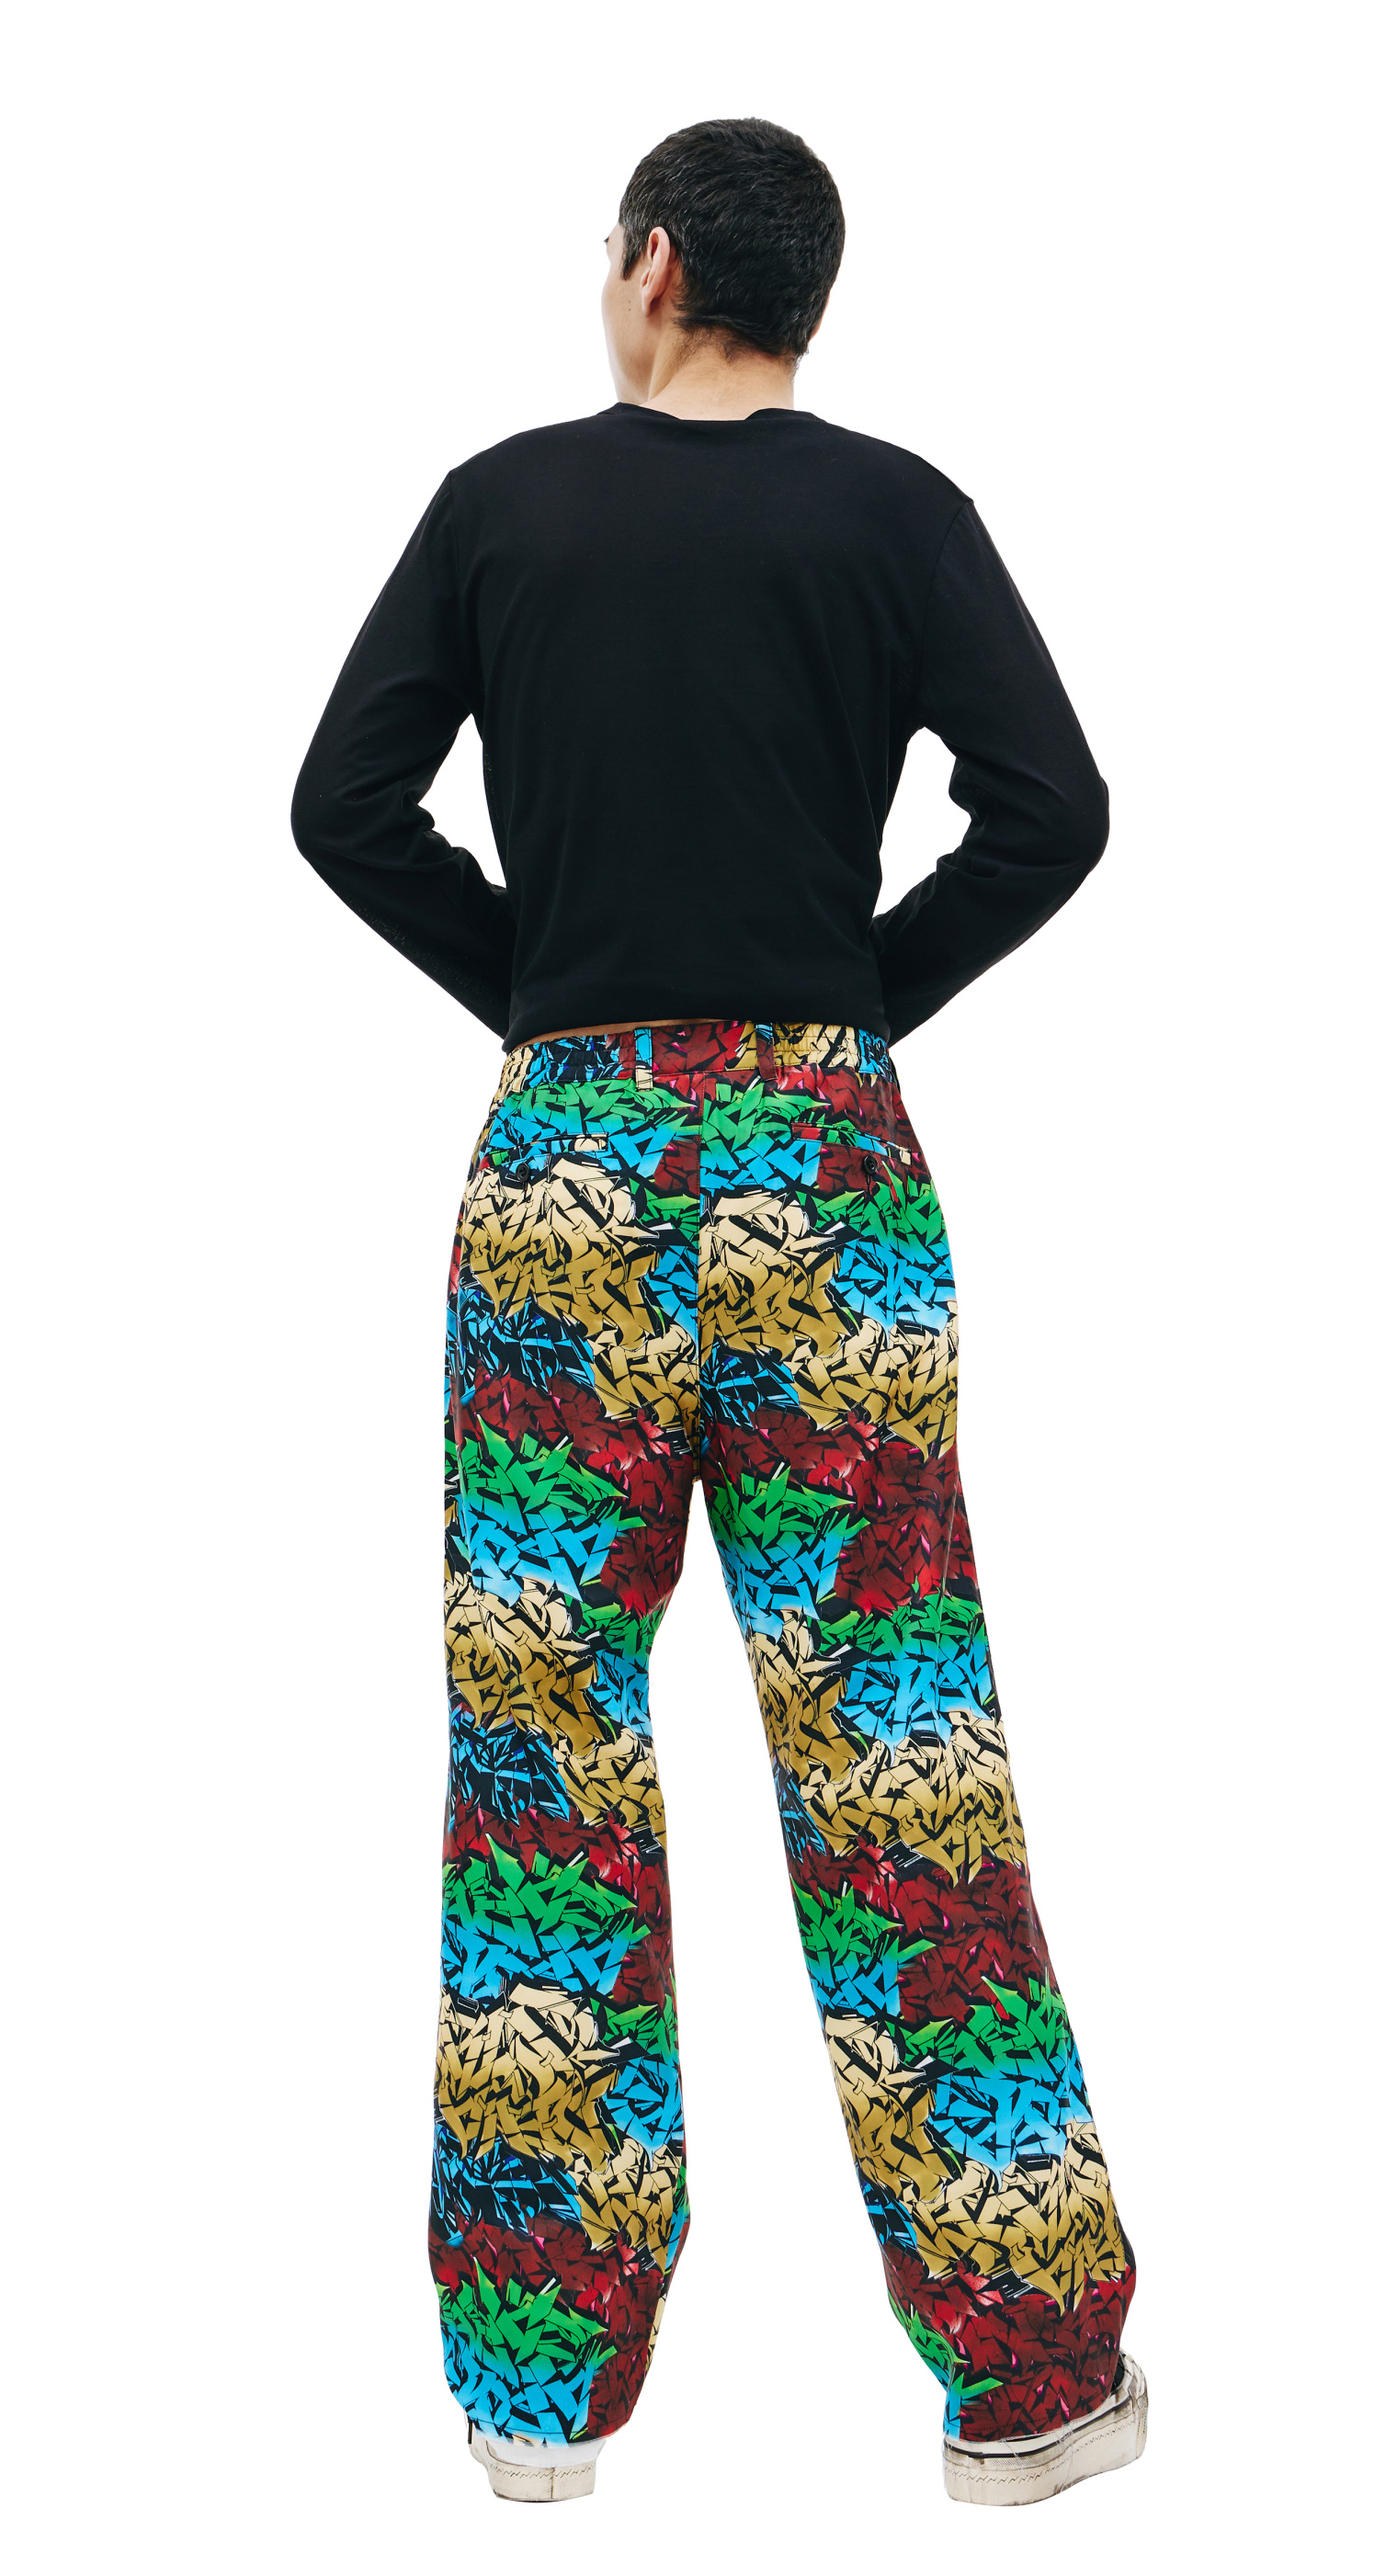 Children of the discordance Personal data printed trousers